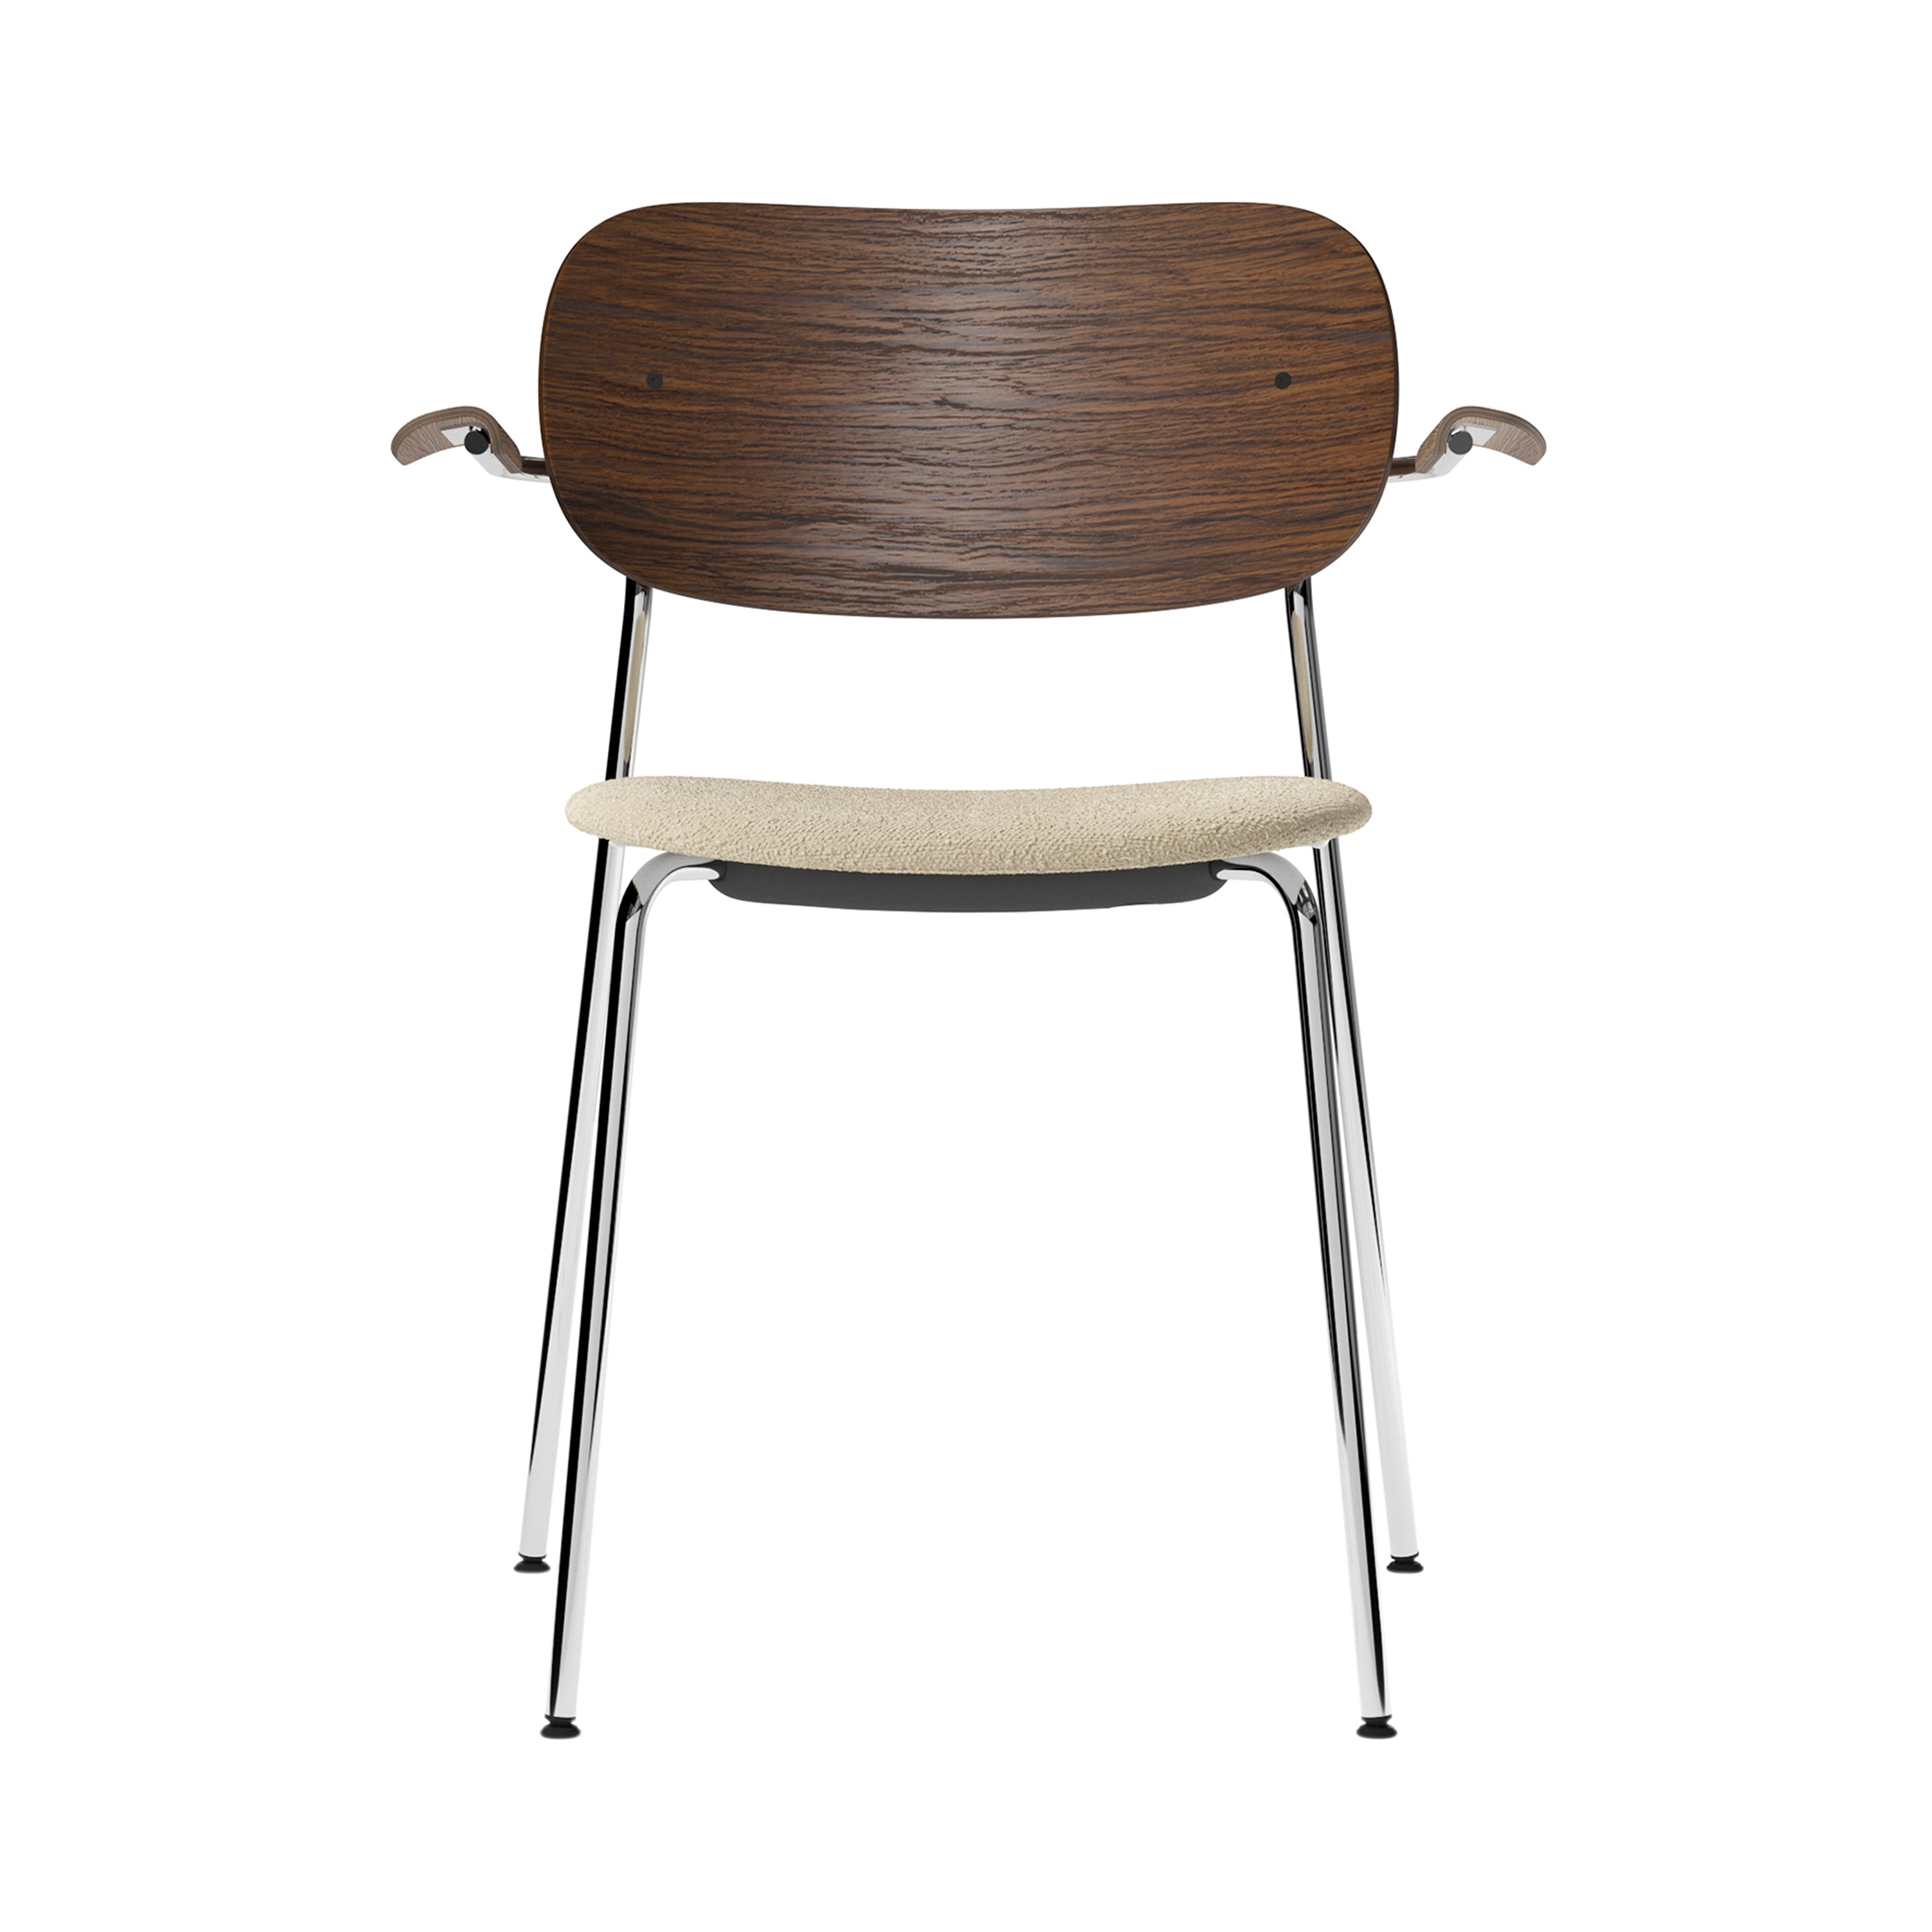 Co Chair with Armrests: Seat Upholstered + Dark Stained Oak + Chrome